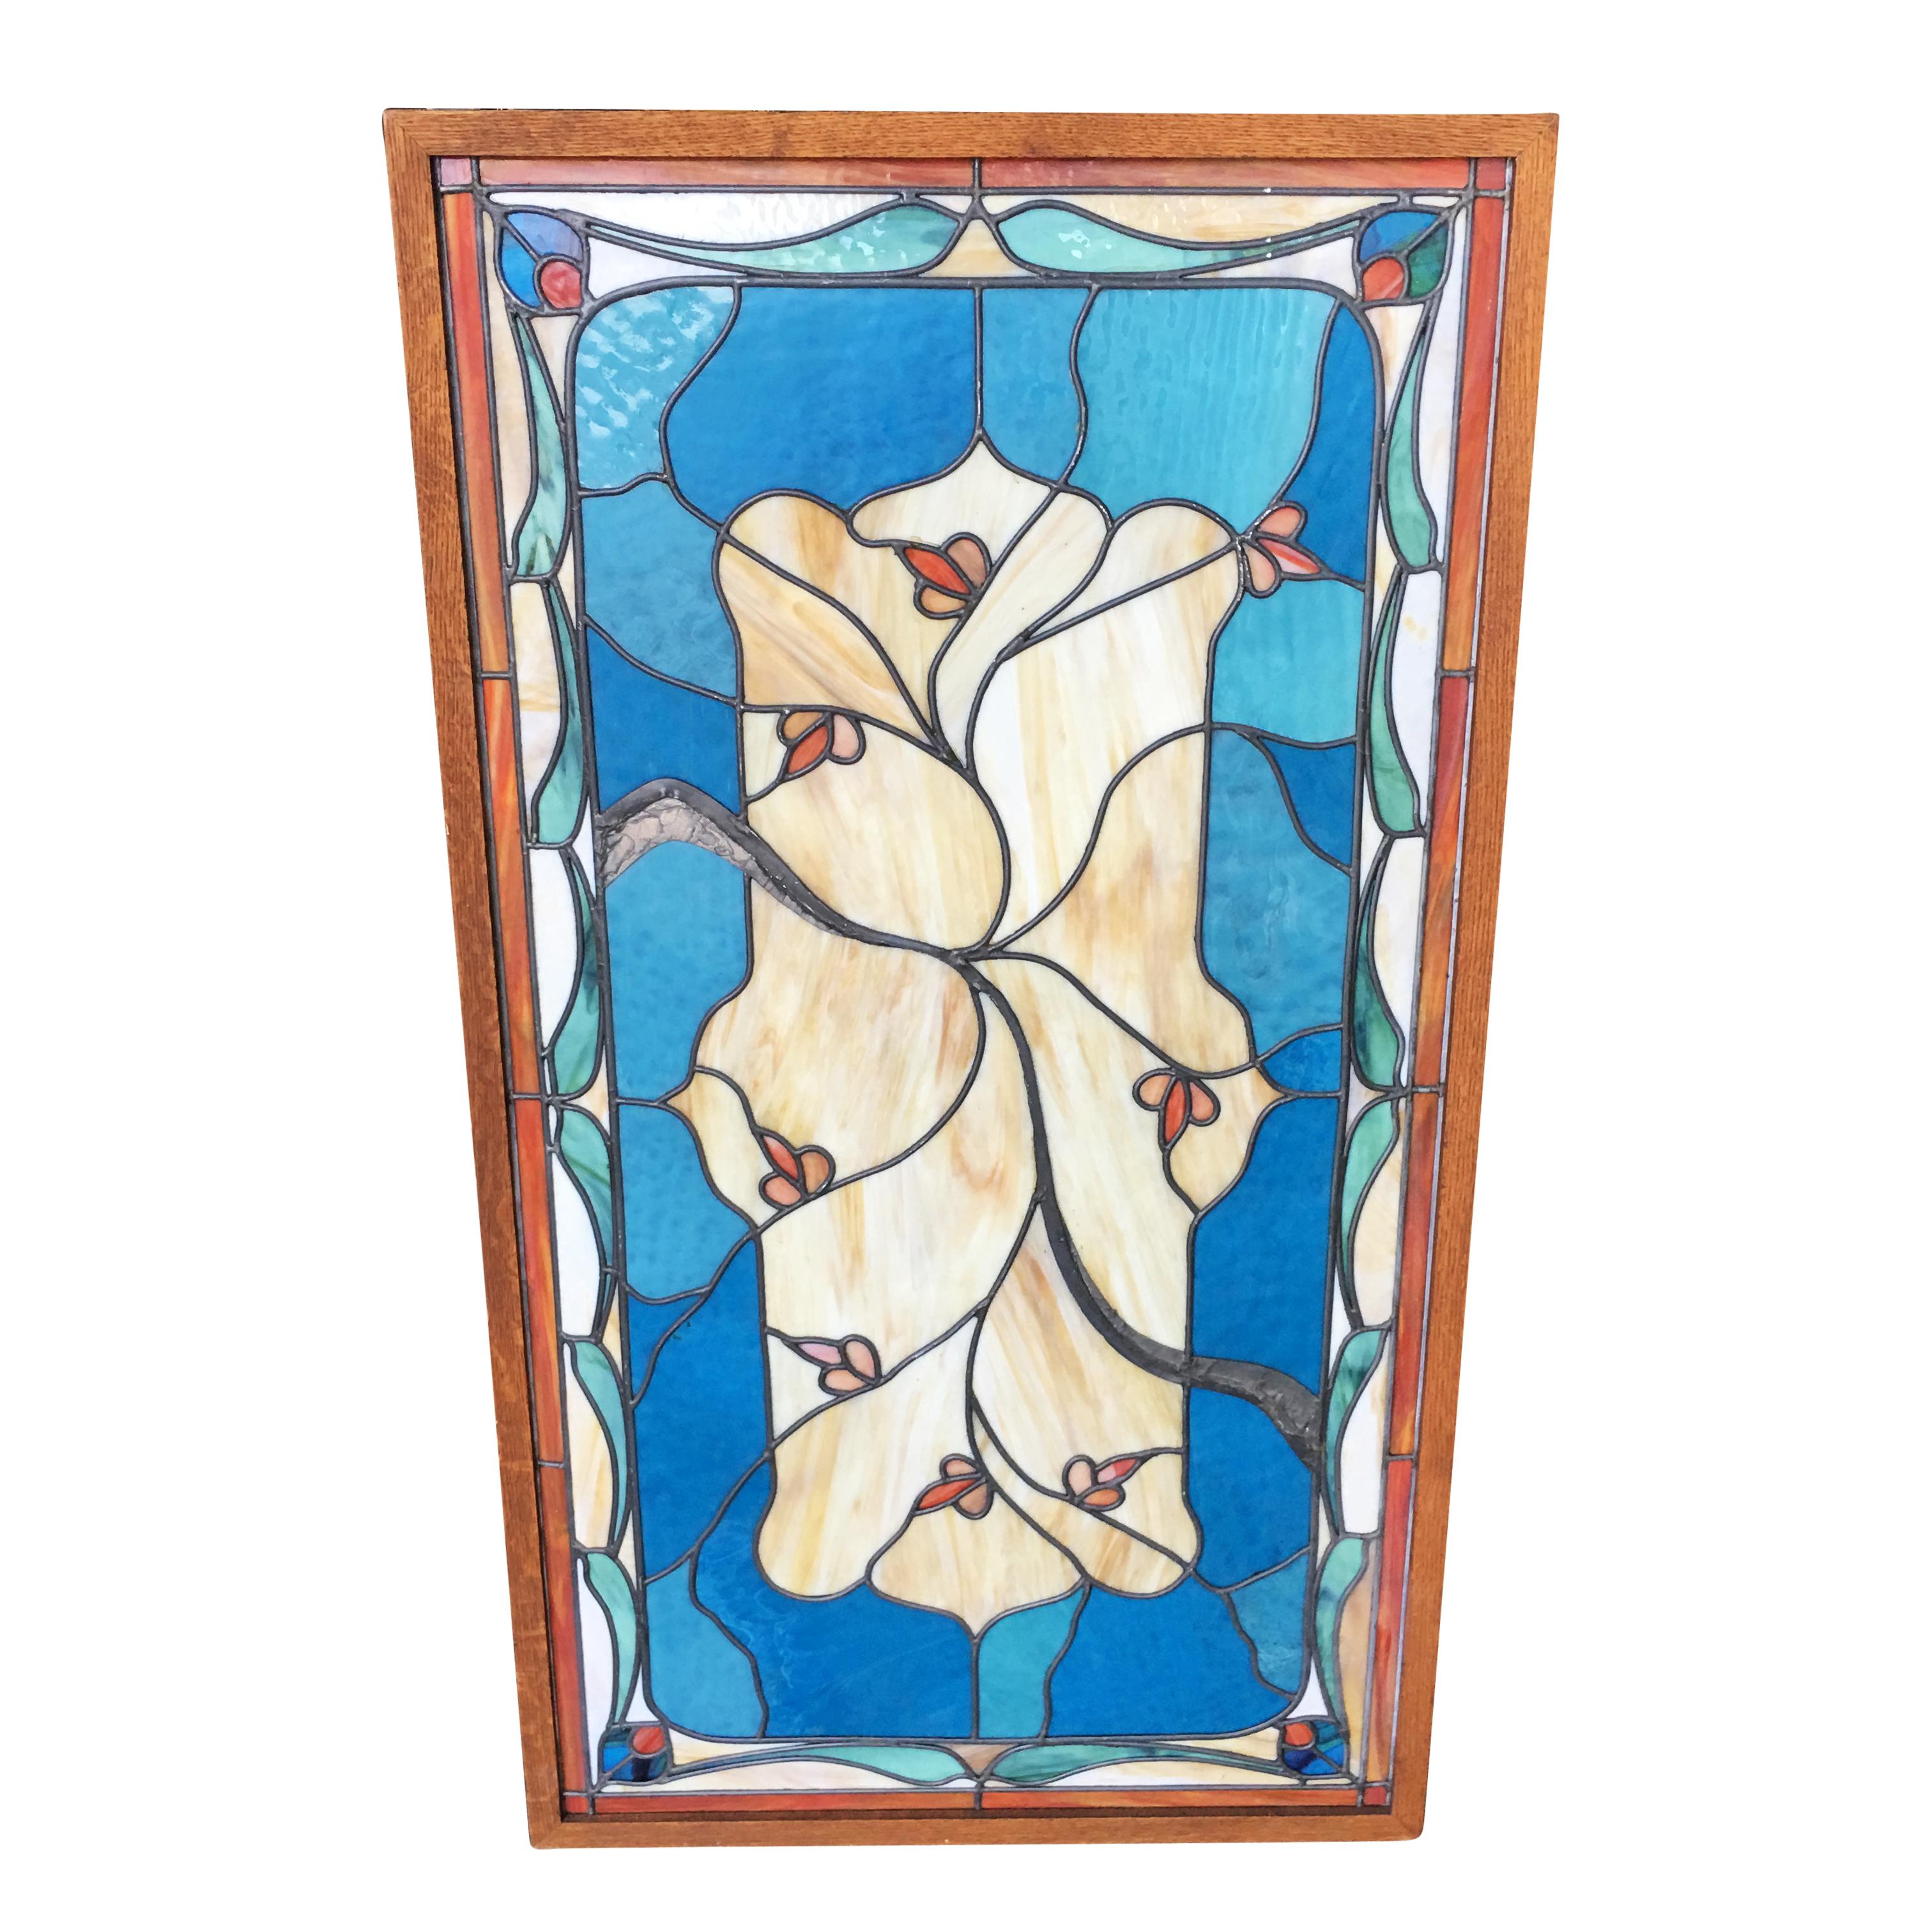 Vintage Art Nouveau stained leaded glass window panel.